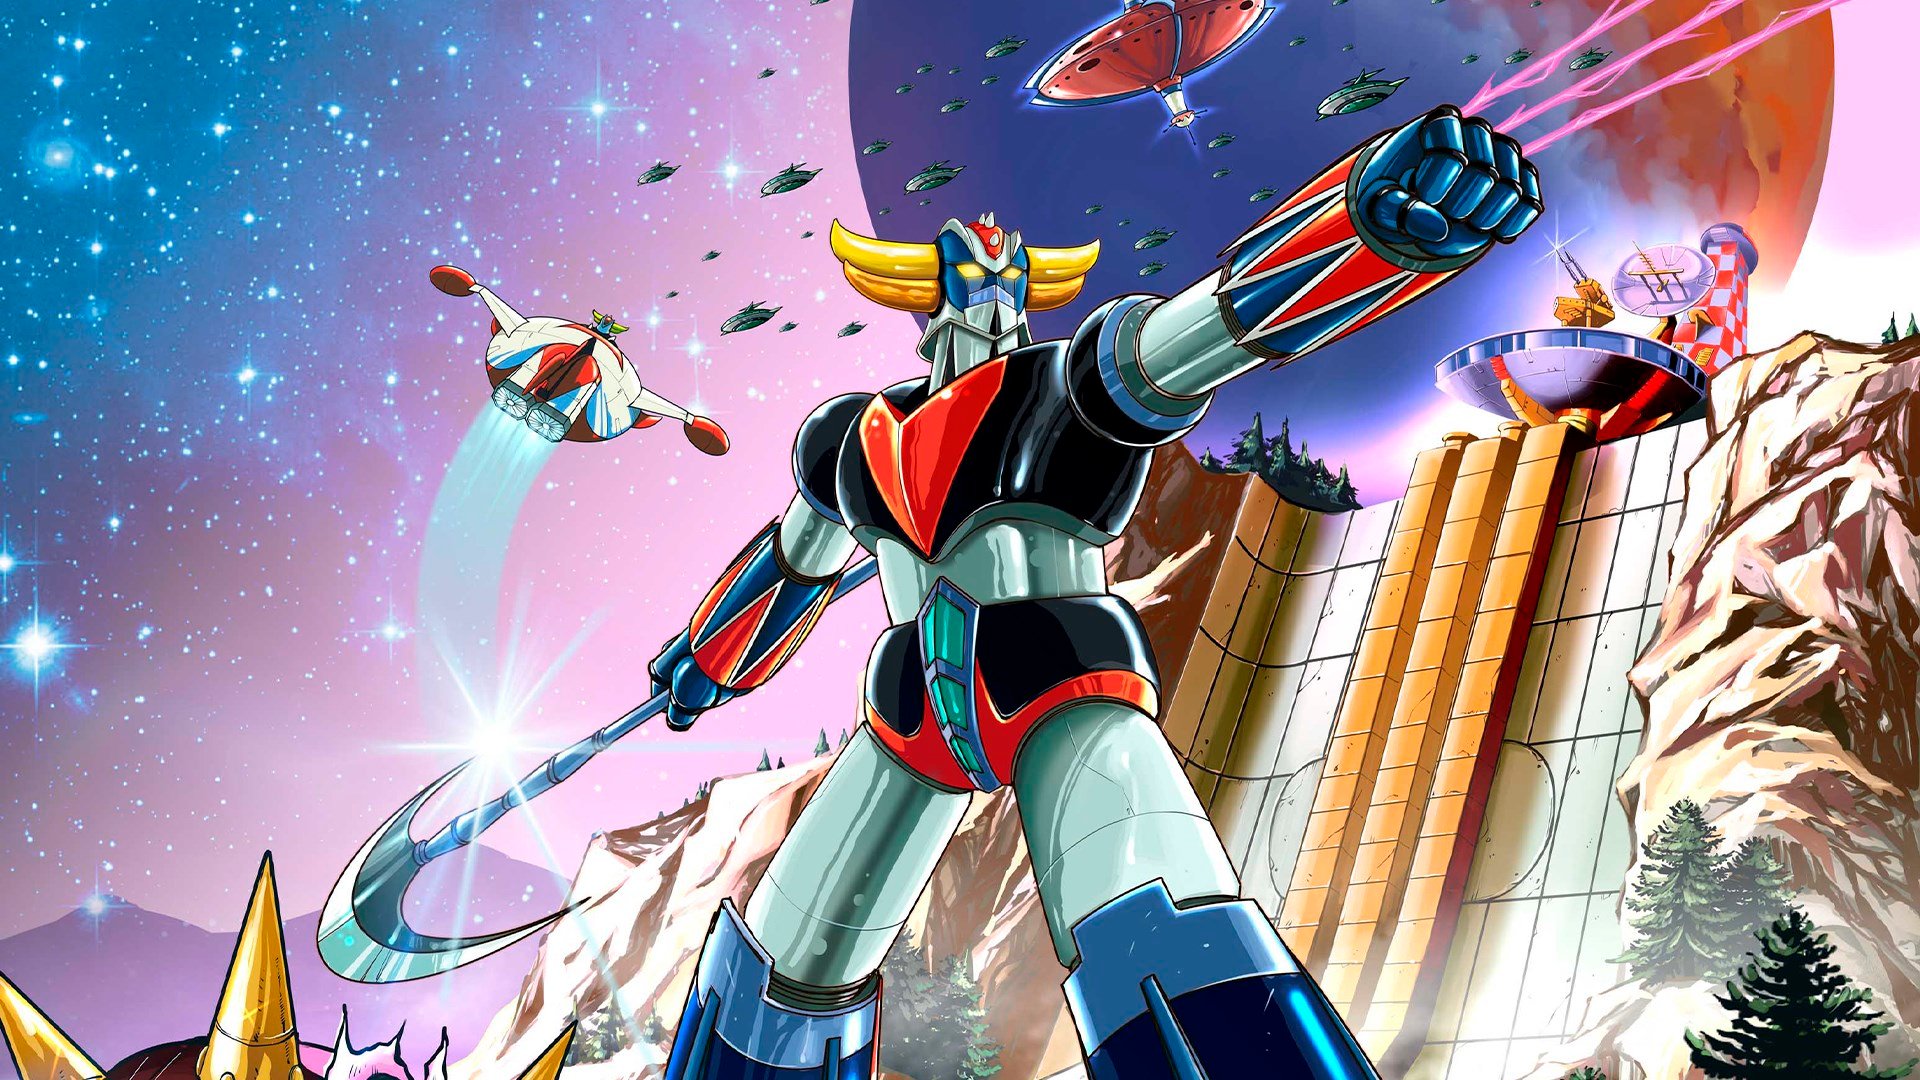 UFO ROBOT GRENDIZER – The Feast of the Wolves cover image